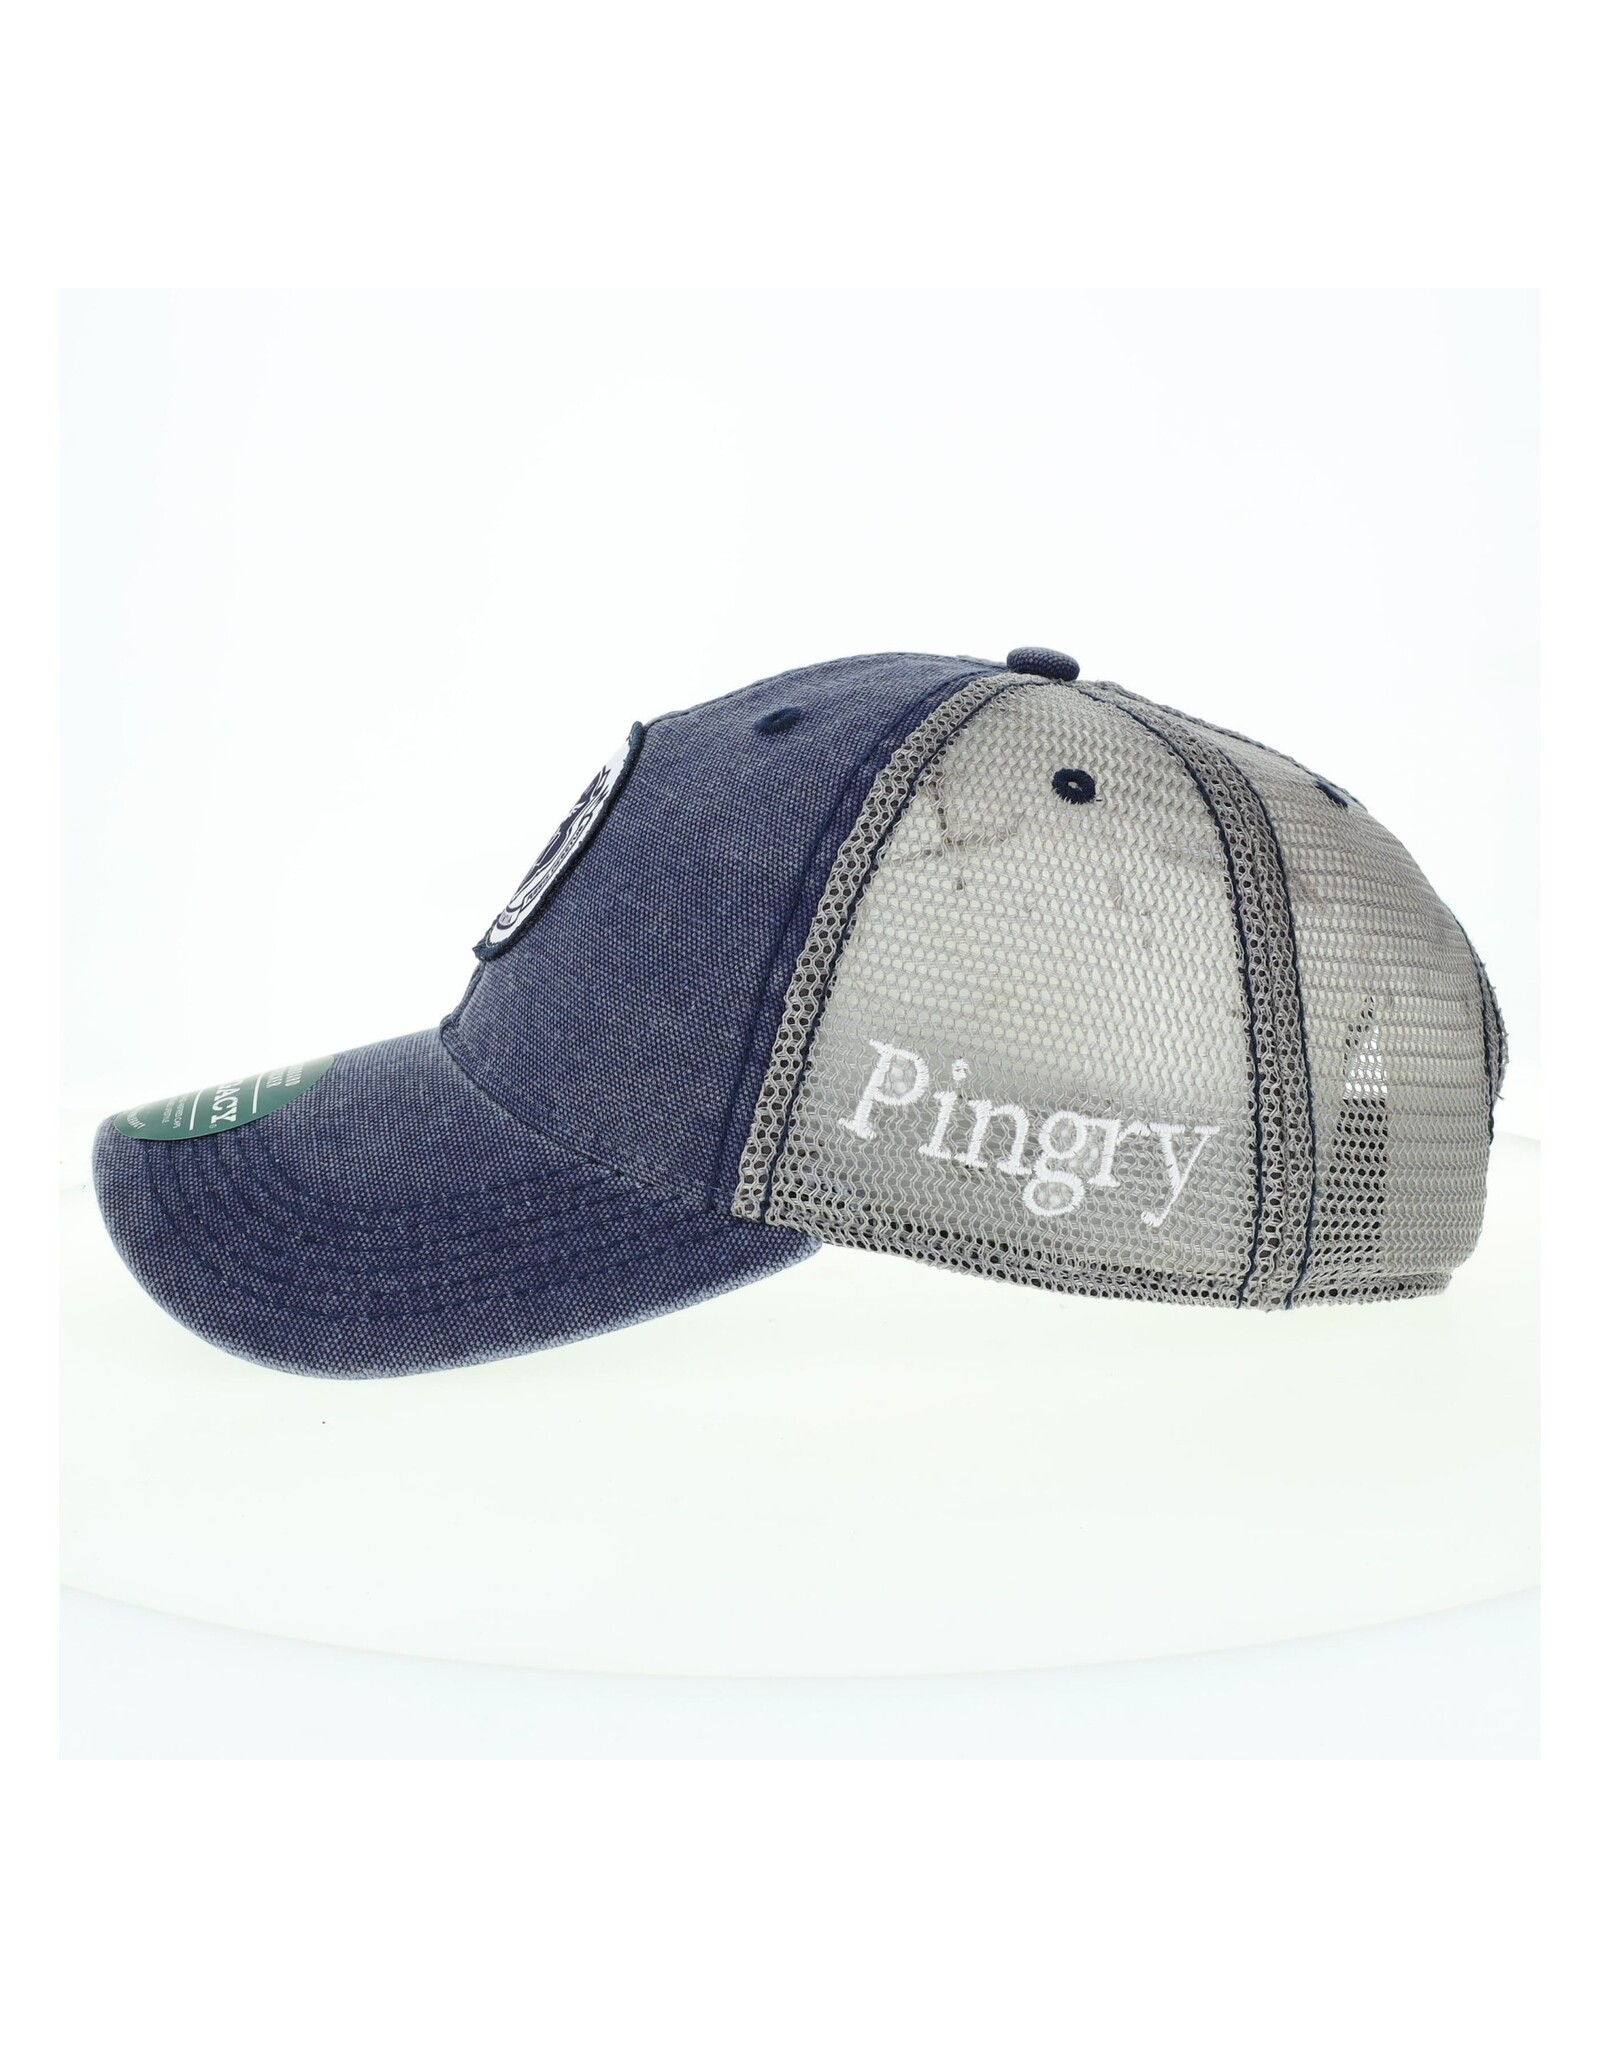 Navy/Gray Trucker with Seal